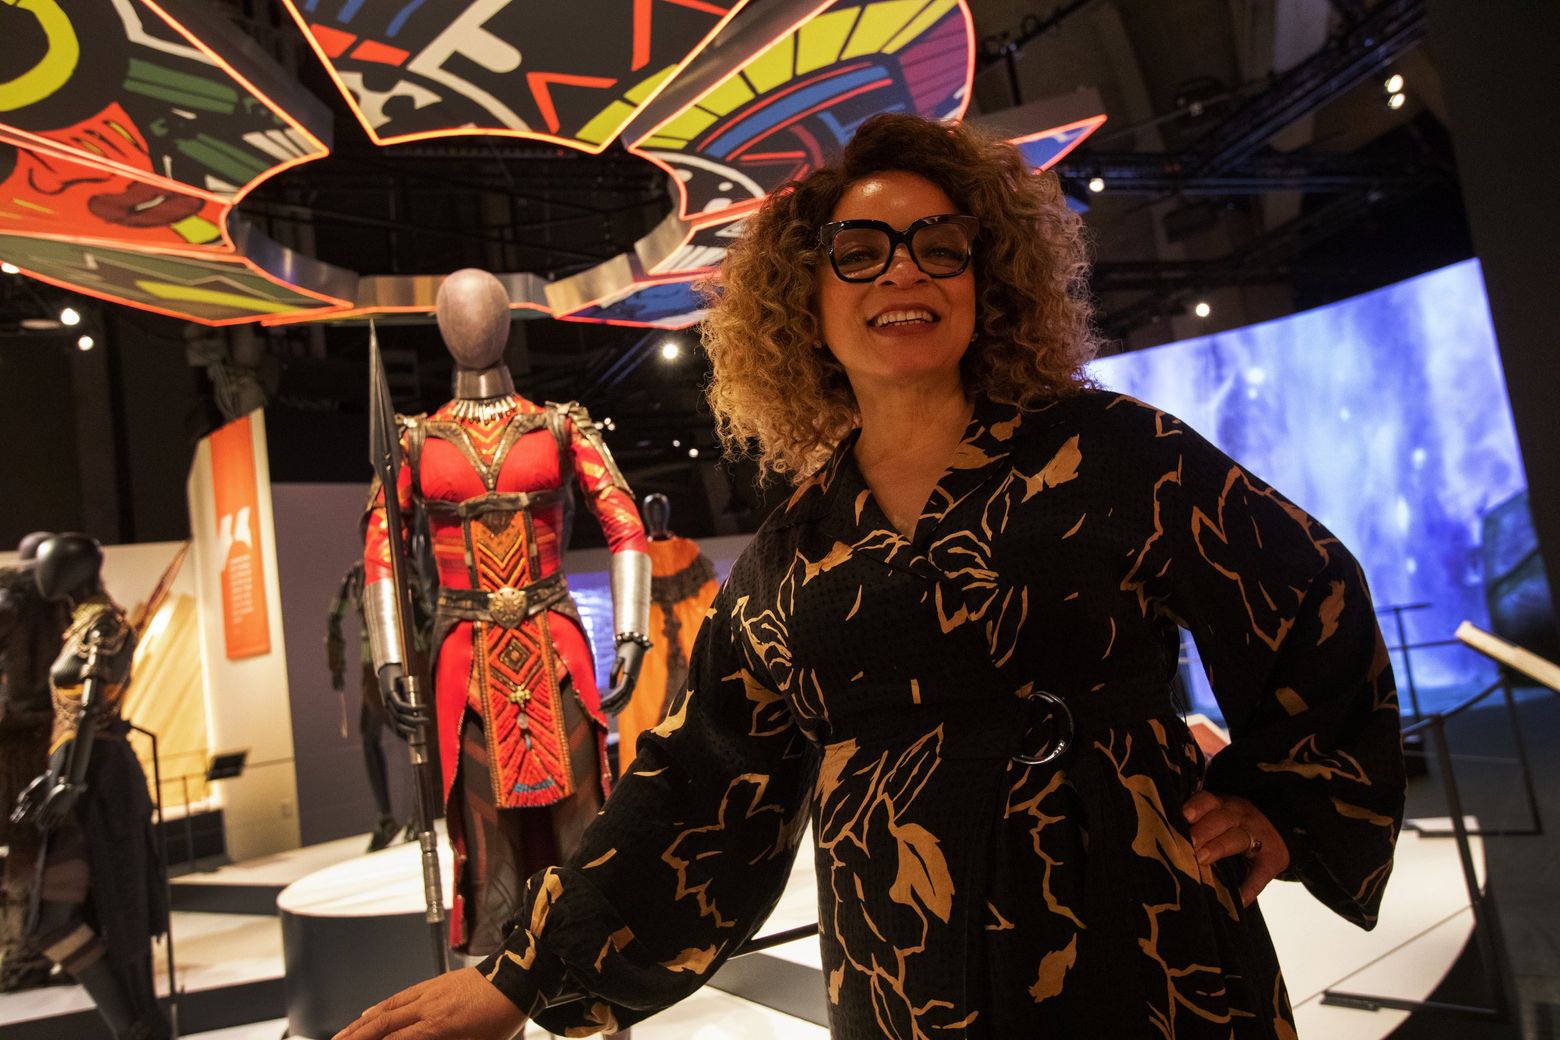 Sunday Best: 'Black Panther' costume designer Ruth E. Carter shares stories behind her works at Seattle's MoPOP exhibit | The Seattle Times